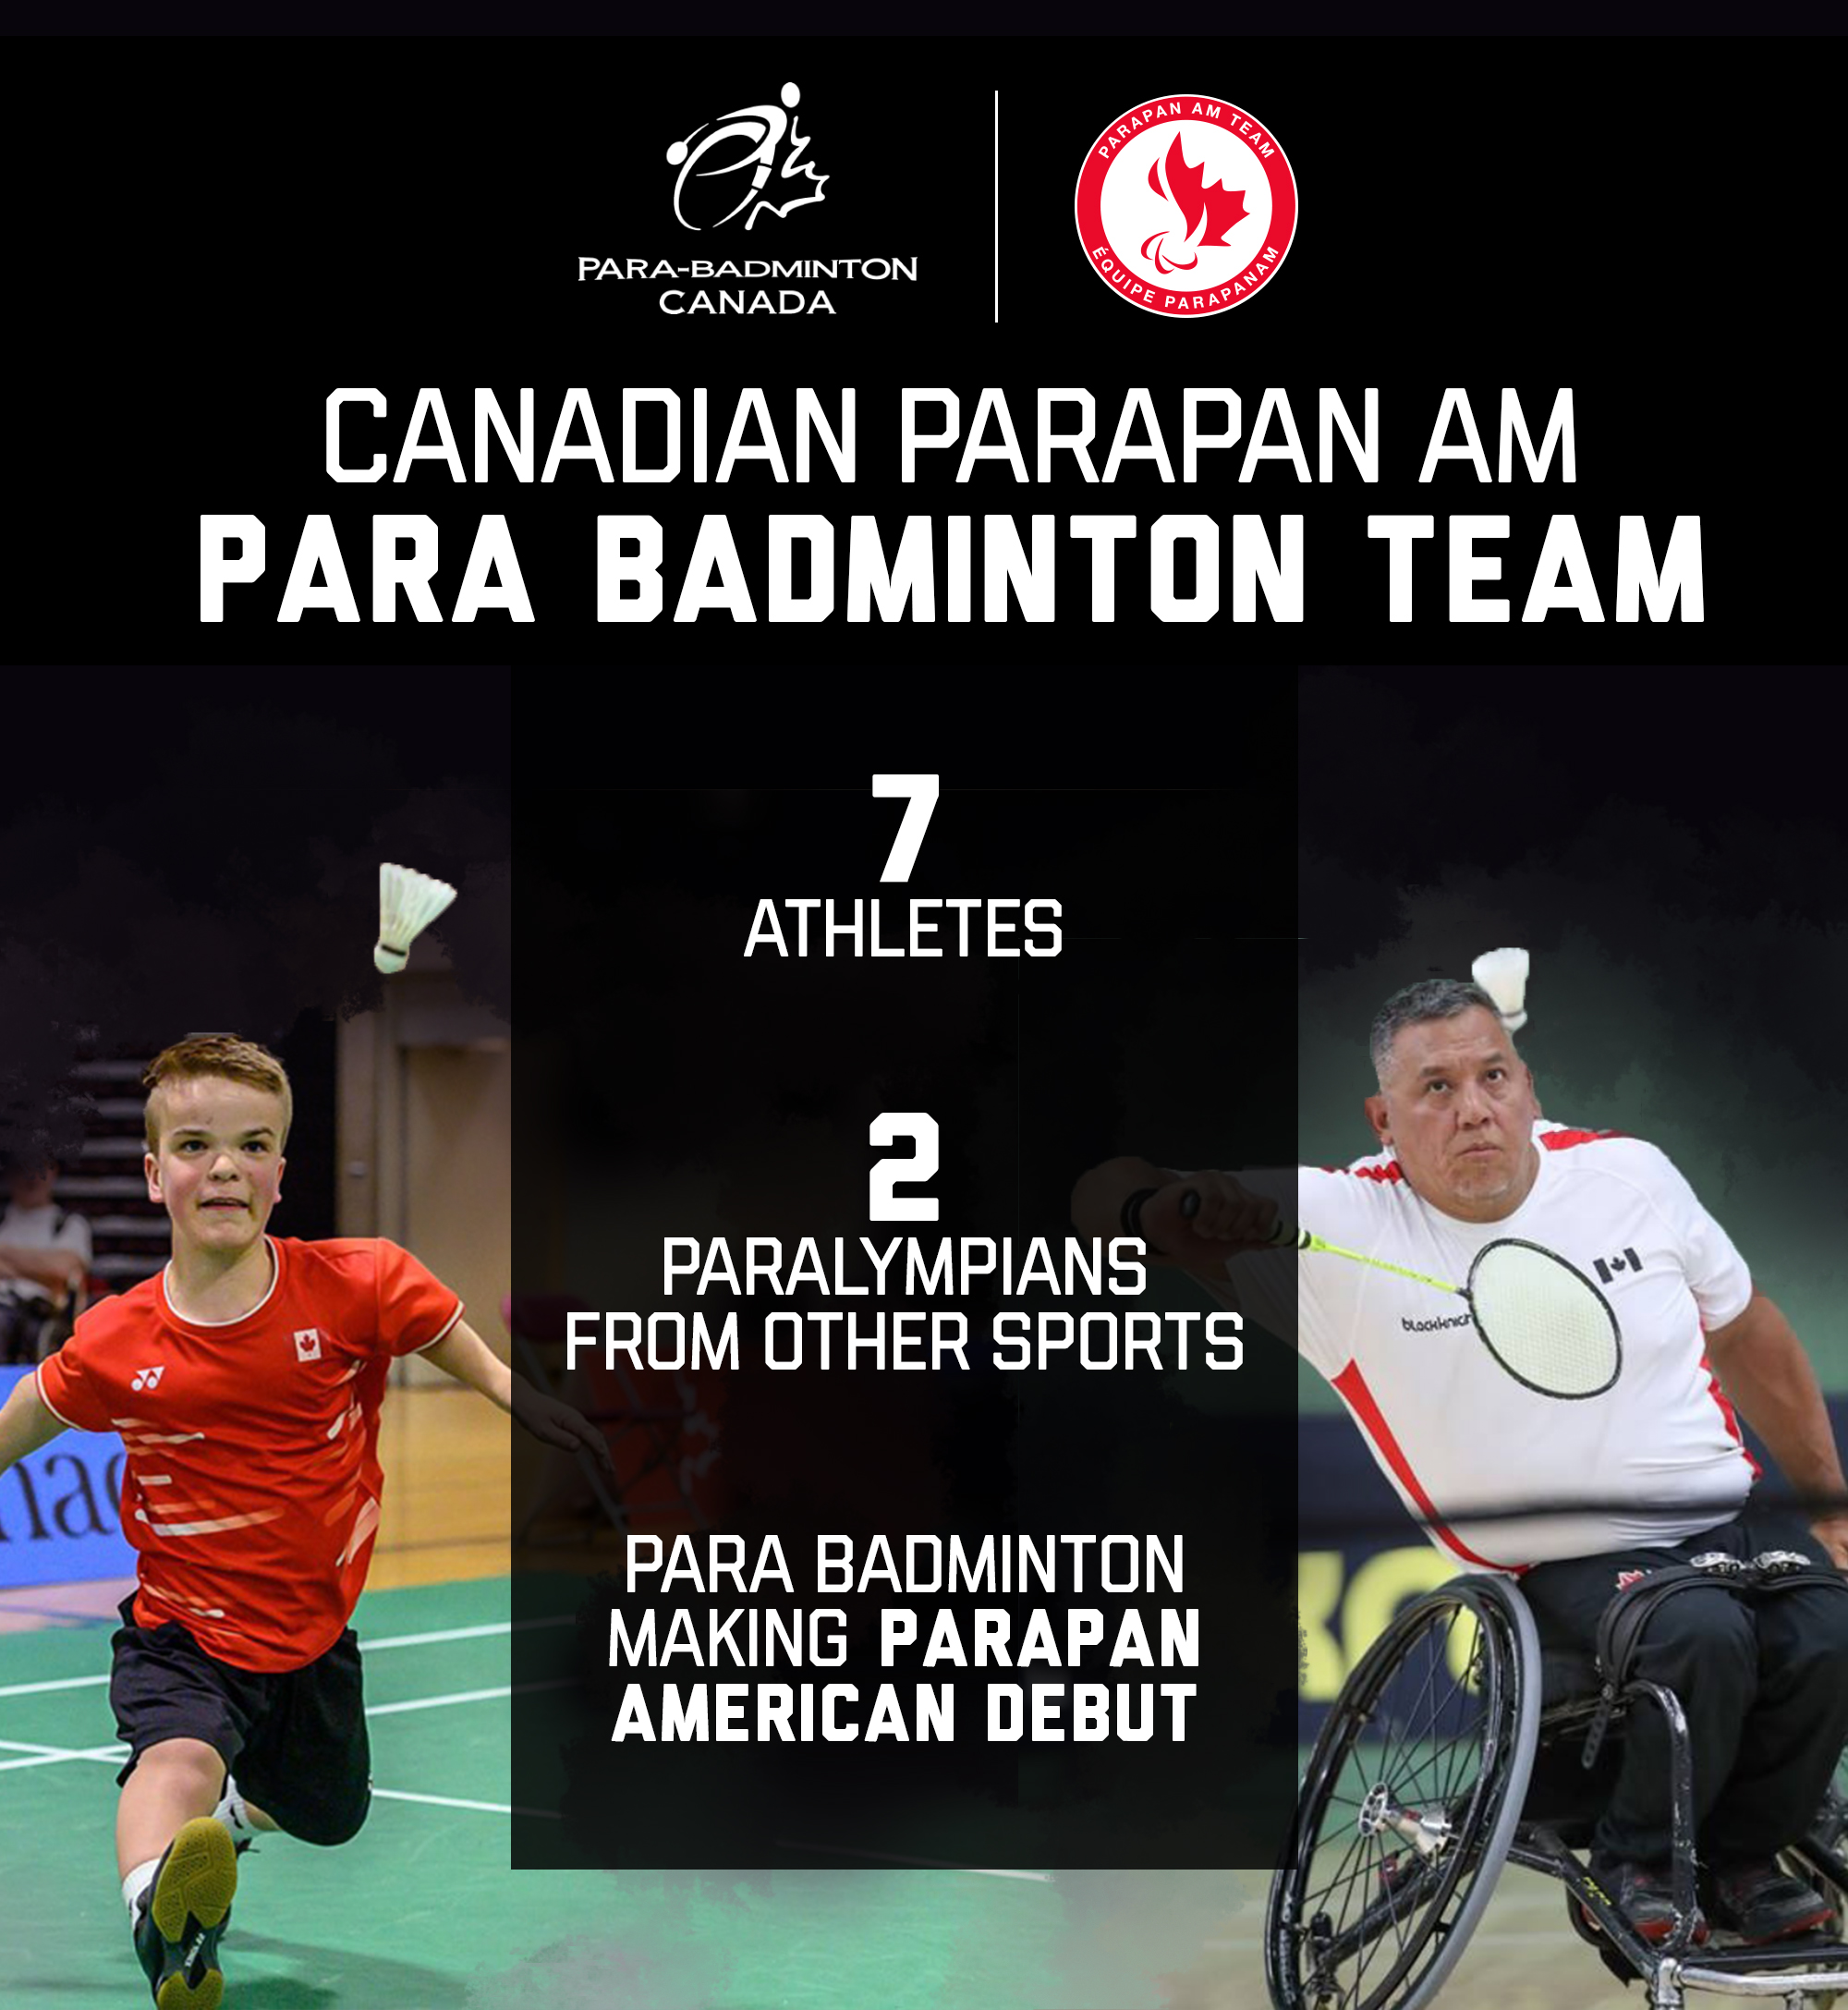 A graphic showing the make-up of the Canadian Parapan Am Badminton Team